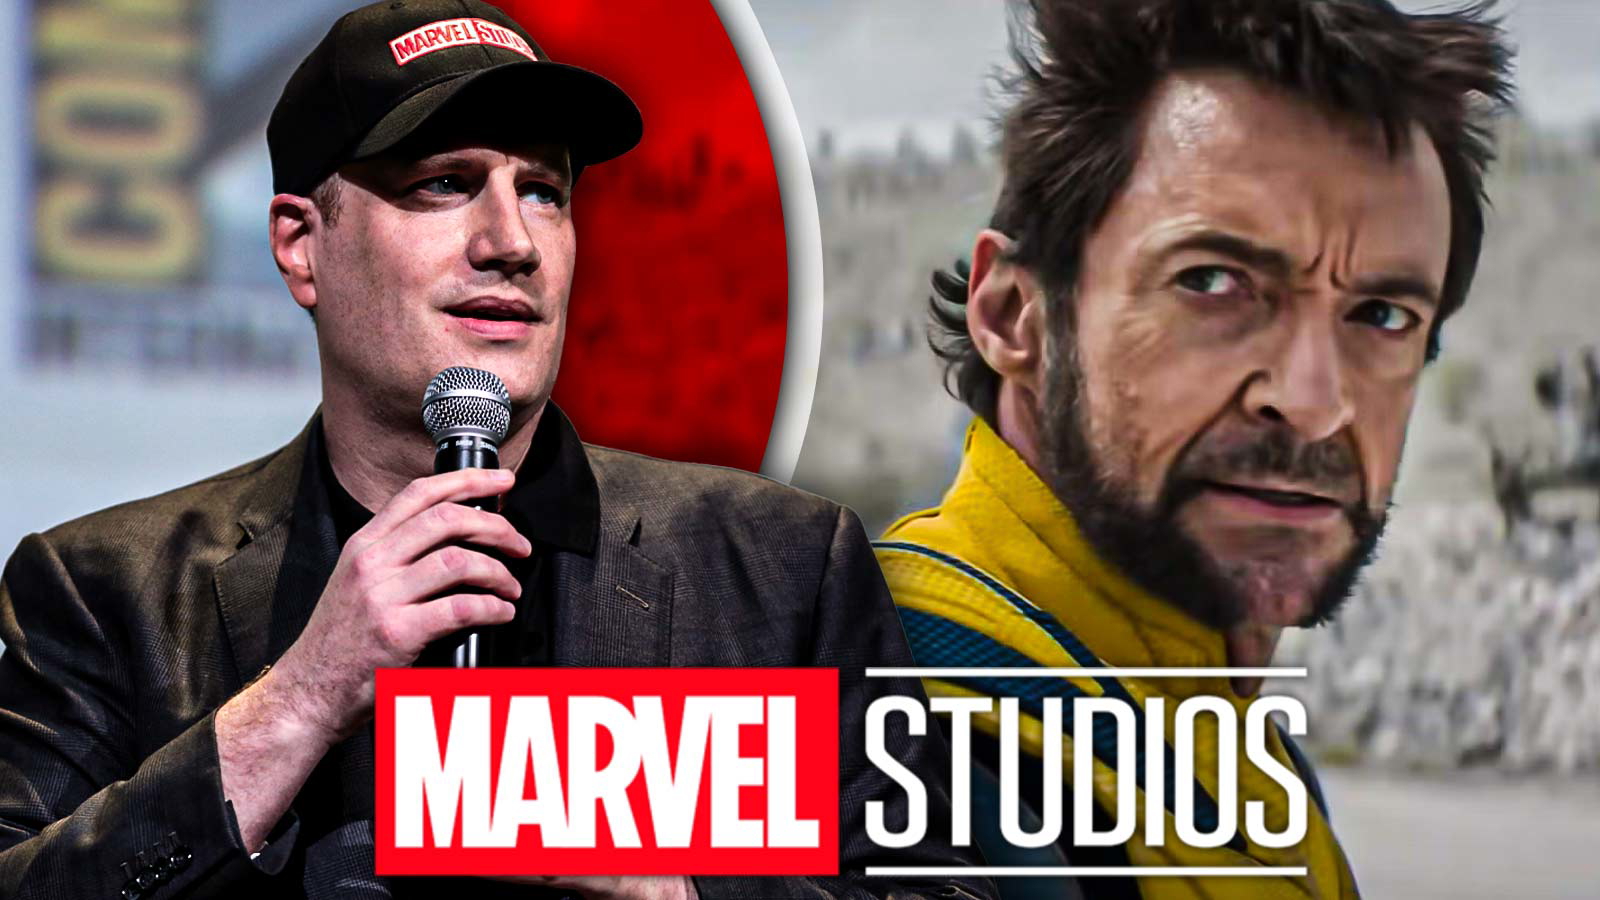 “Wish we didn’t wait till Hugh Jackman was 60”: Kevin Feige Made 1 Little Mistake With Bringing Mutants to MCU